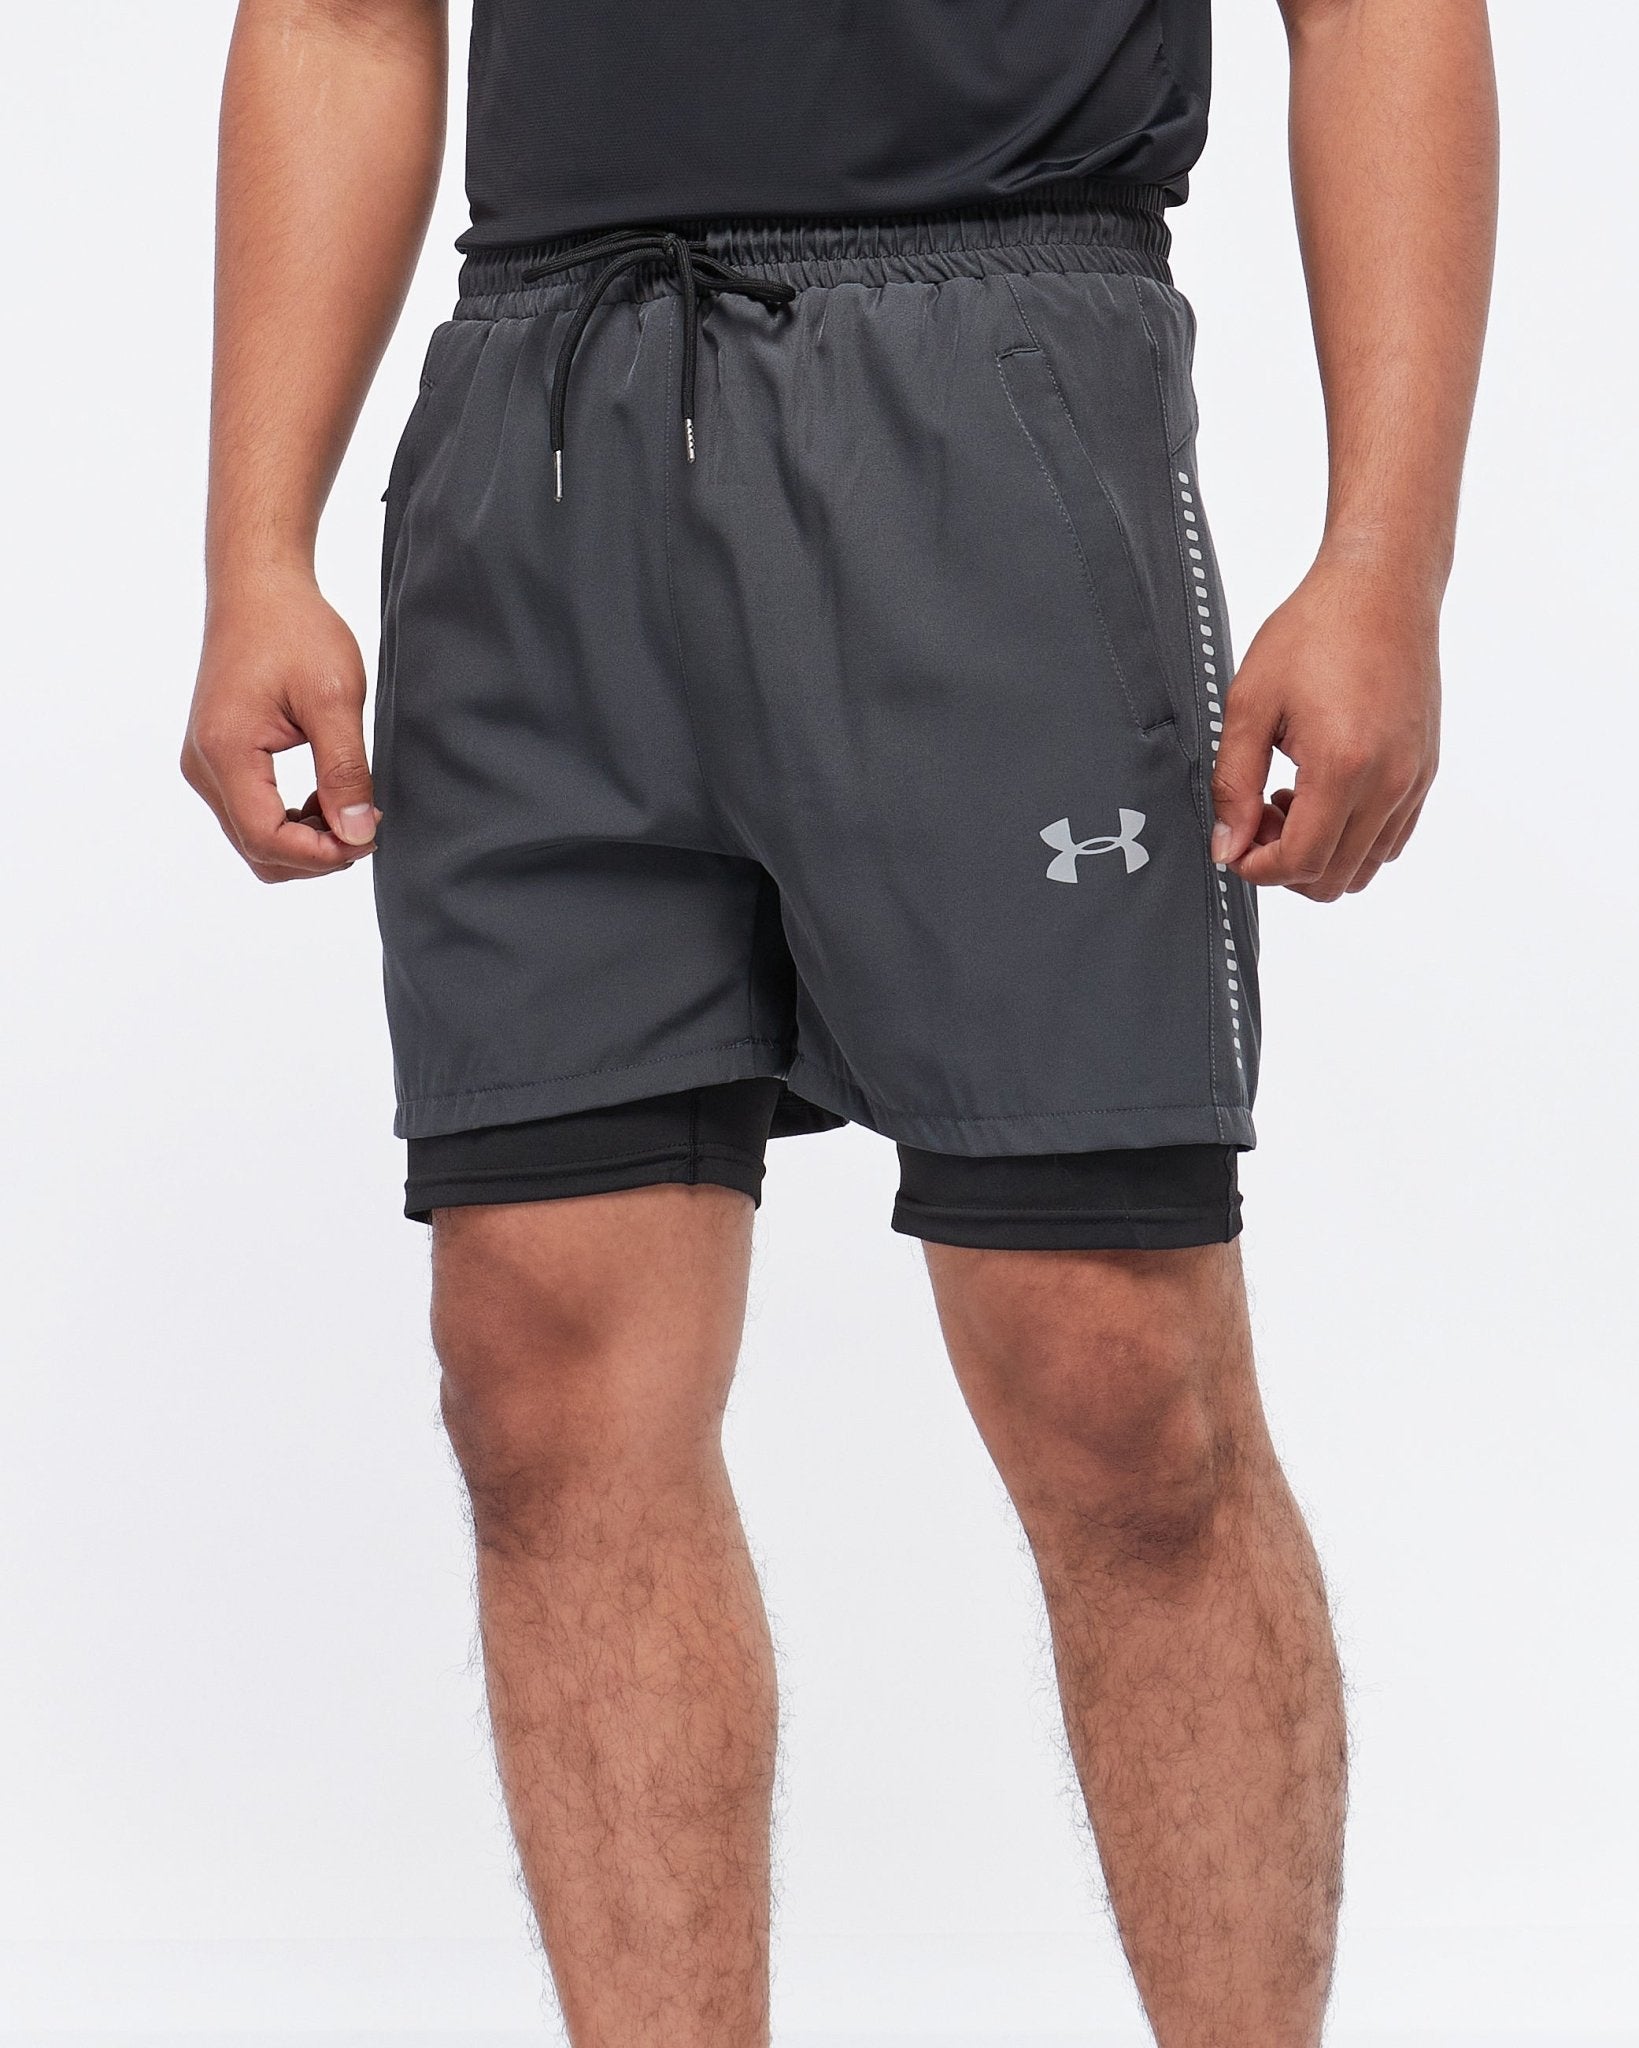 MOI OUTFIT-Side Stripes Printed 2 in 1 Men Sport Shorts 13.90